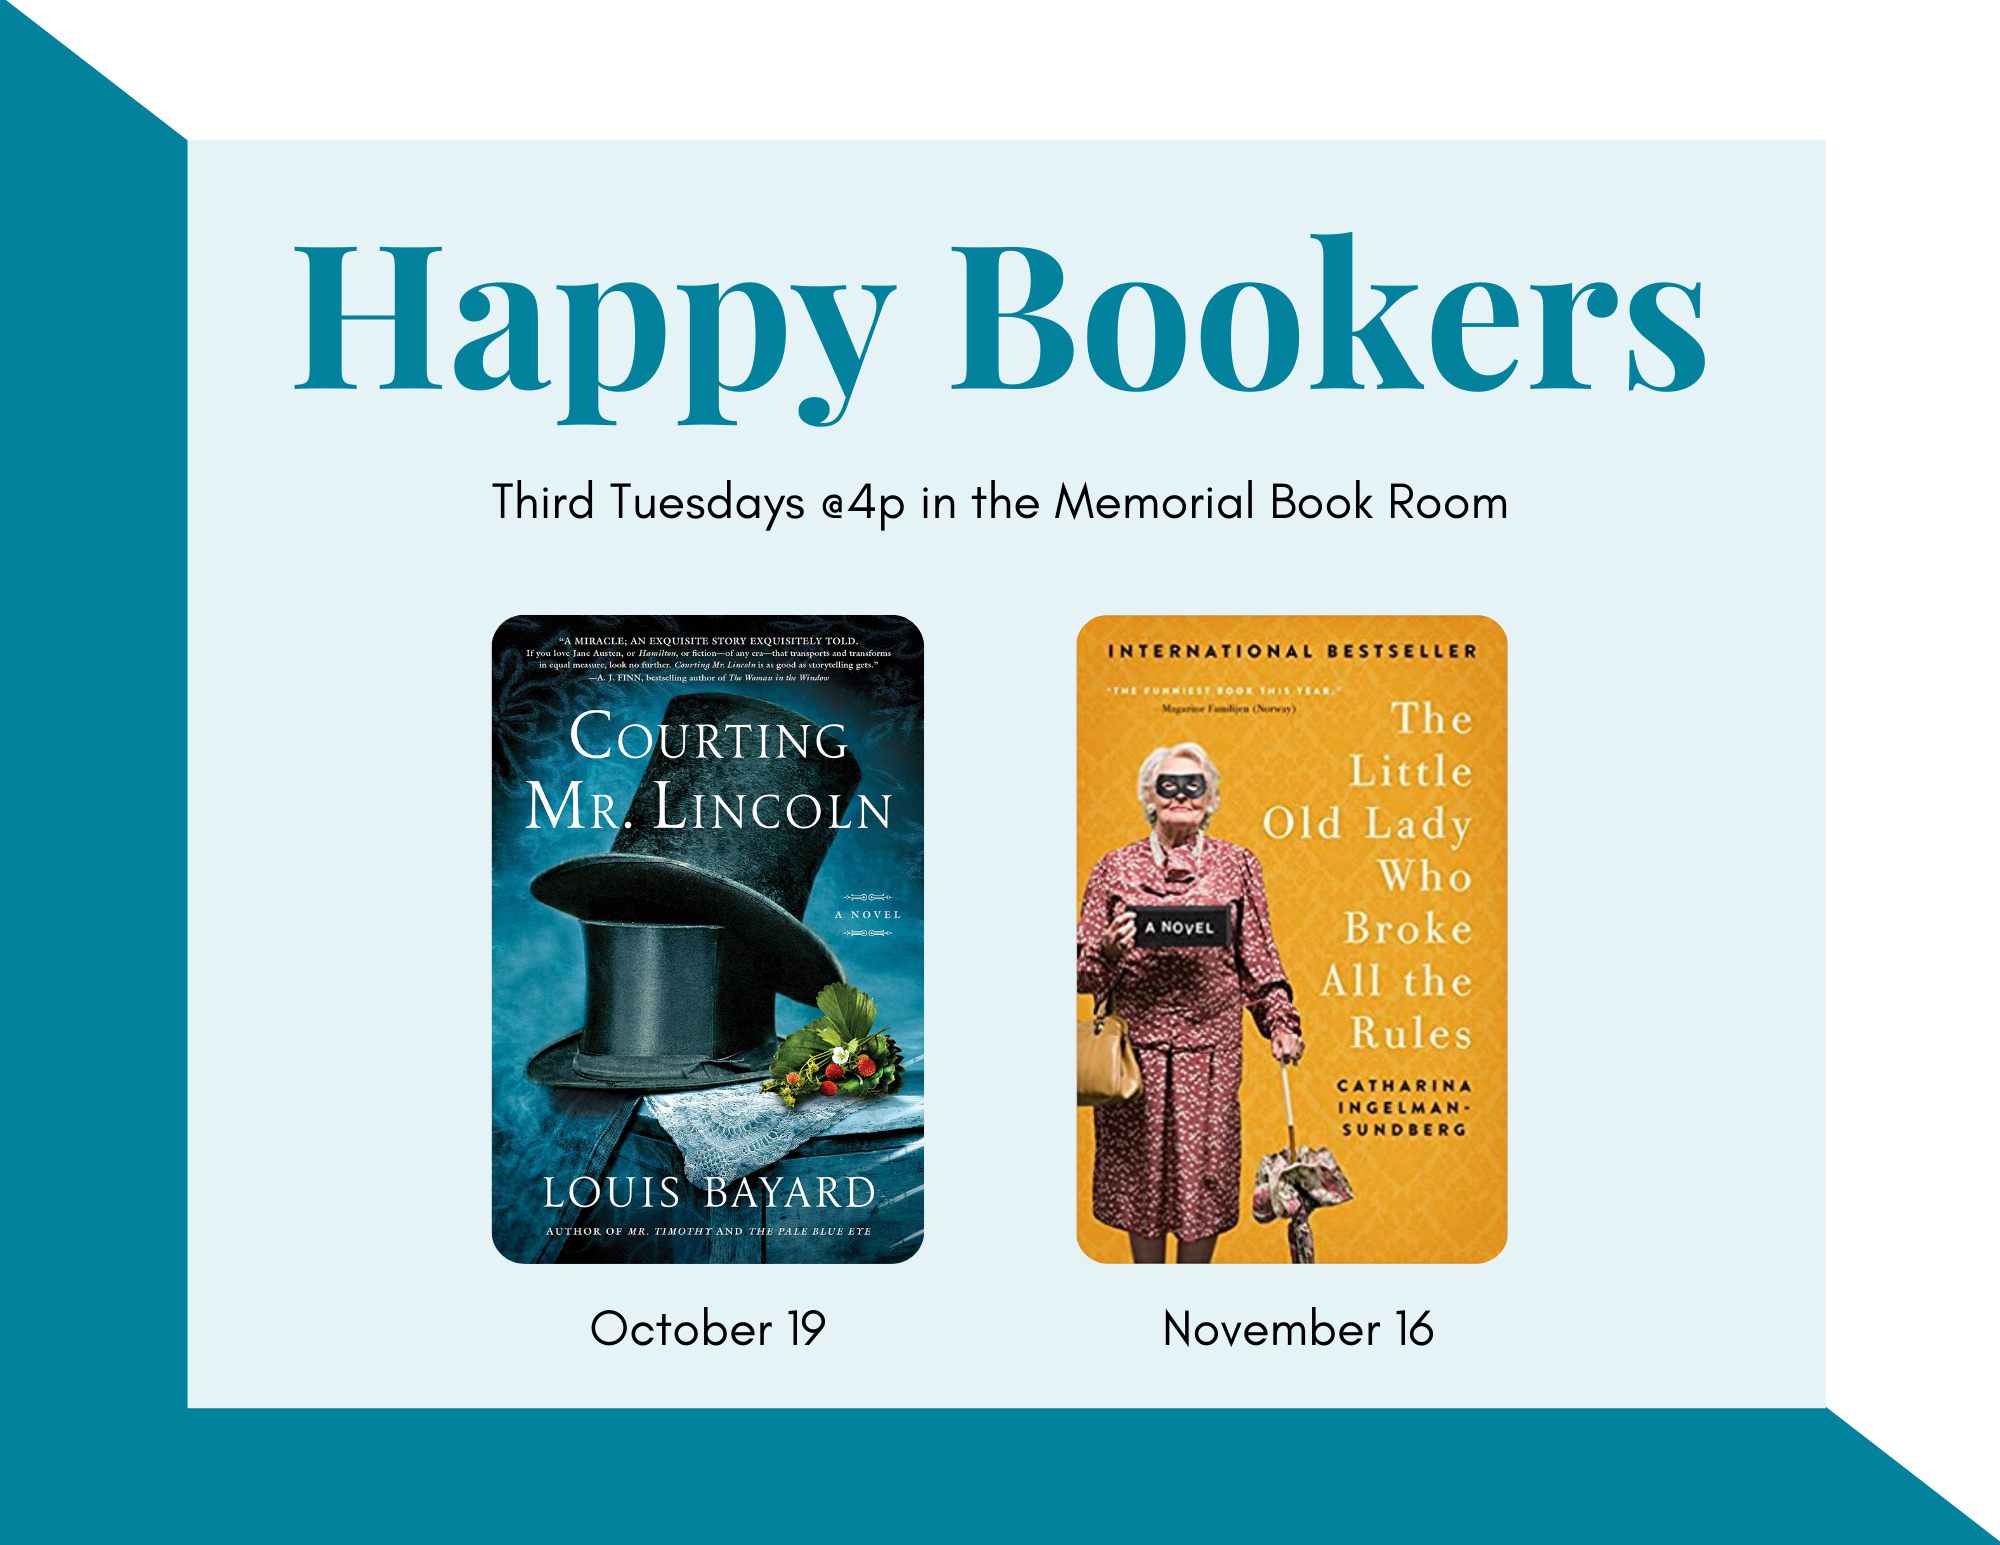 Teal text on a light blue background reads "Happy Bookers" with black text below saying "Third Tuesdays @4p in the Memorial Book Room". Below are images of the covers of the books Courting Mr. Lincoln and The Little Old Lady Who Broke All the Rules, with the dates October 19 and November 16 listed respectively below each.